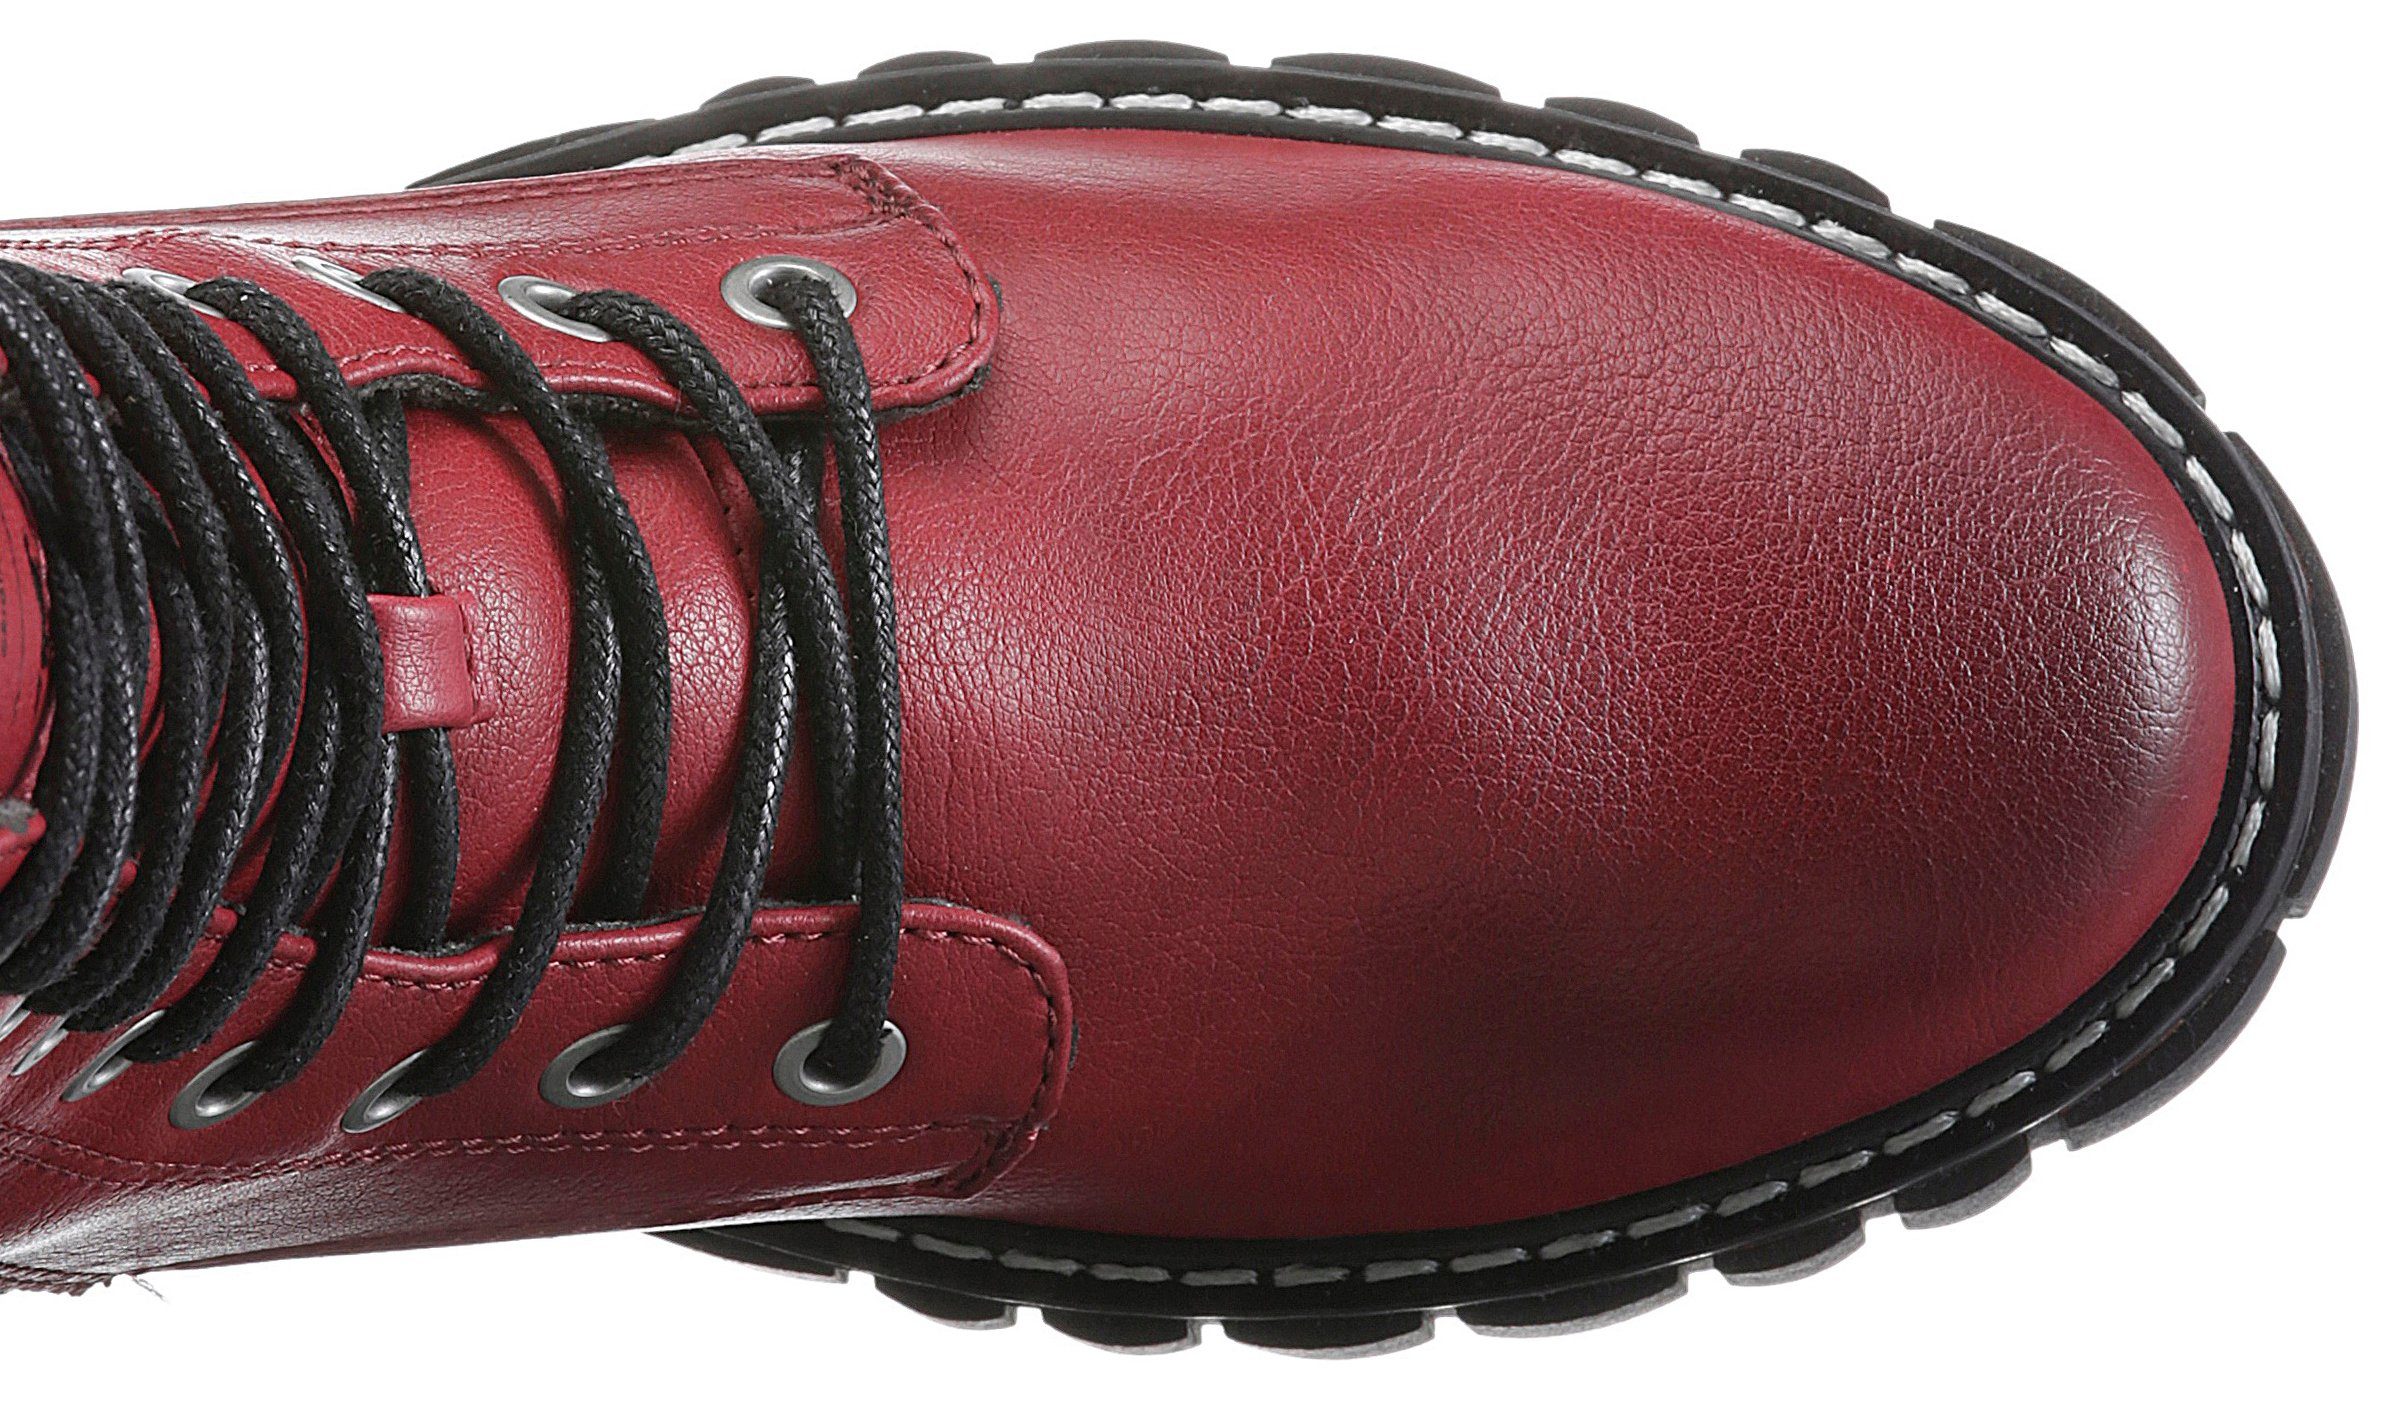 Mustang Shoes Schnürboots mit Profilsohle rot